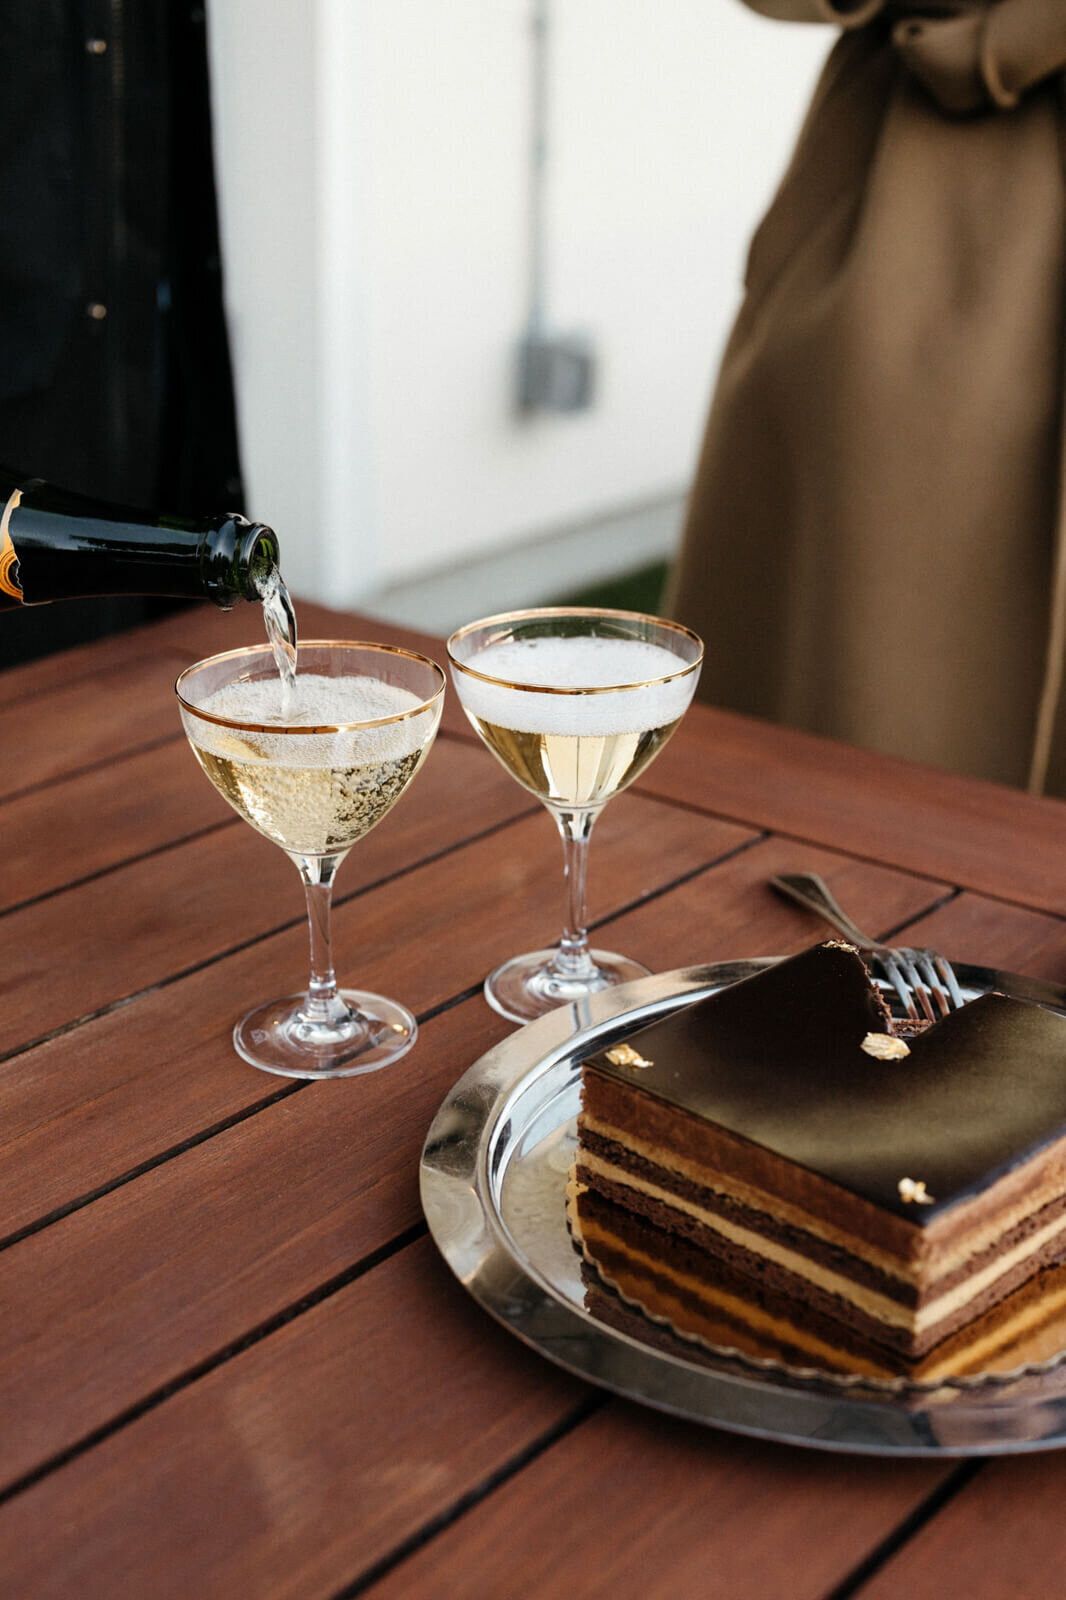 Two wine glasses and a slice of chocolate cake are on a table. The bottle of champagne is being poured over one wine glass.